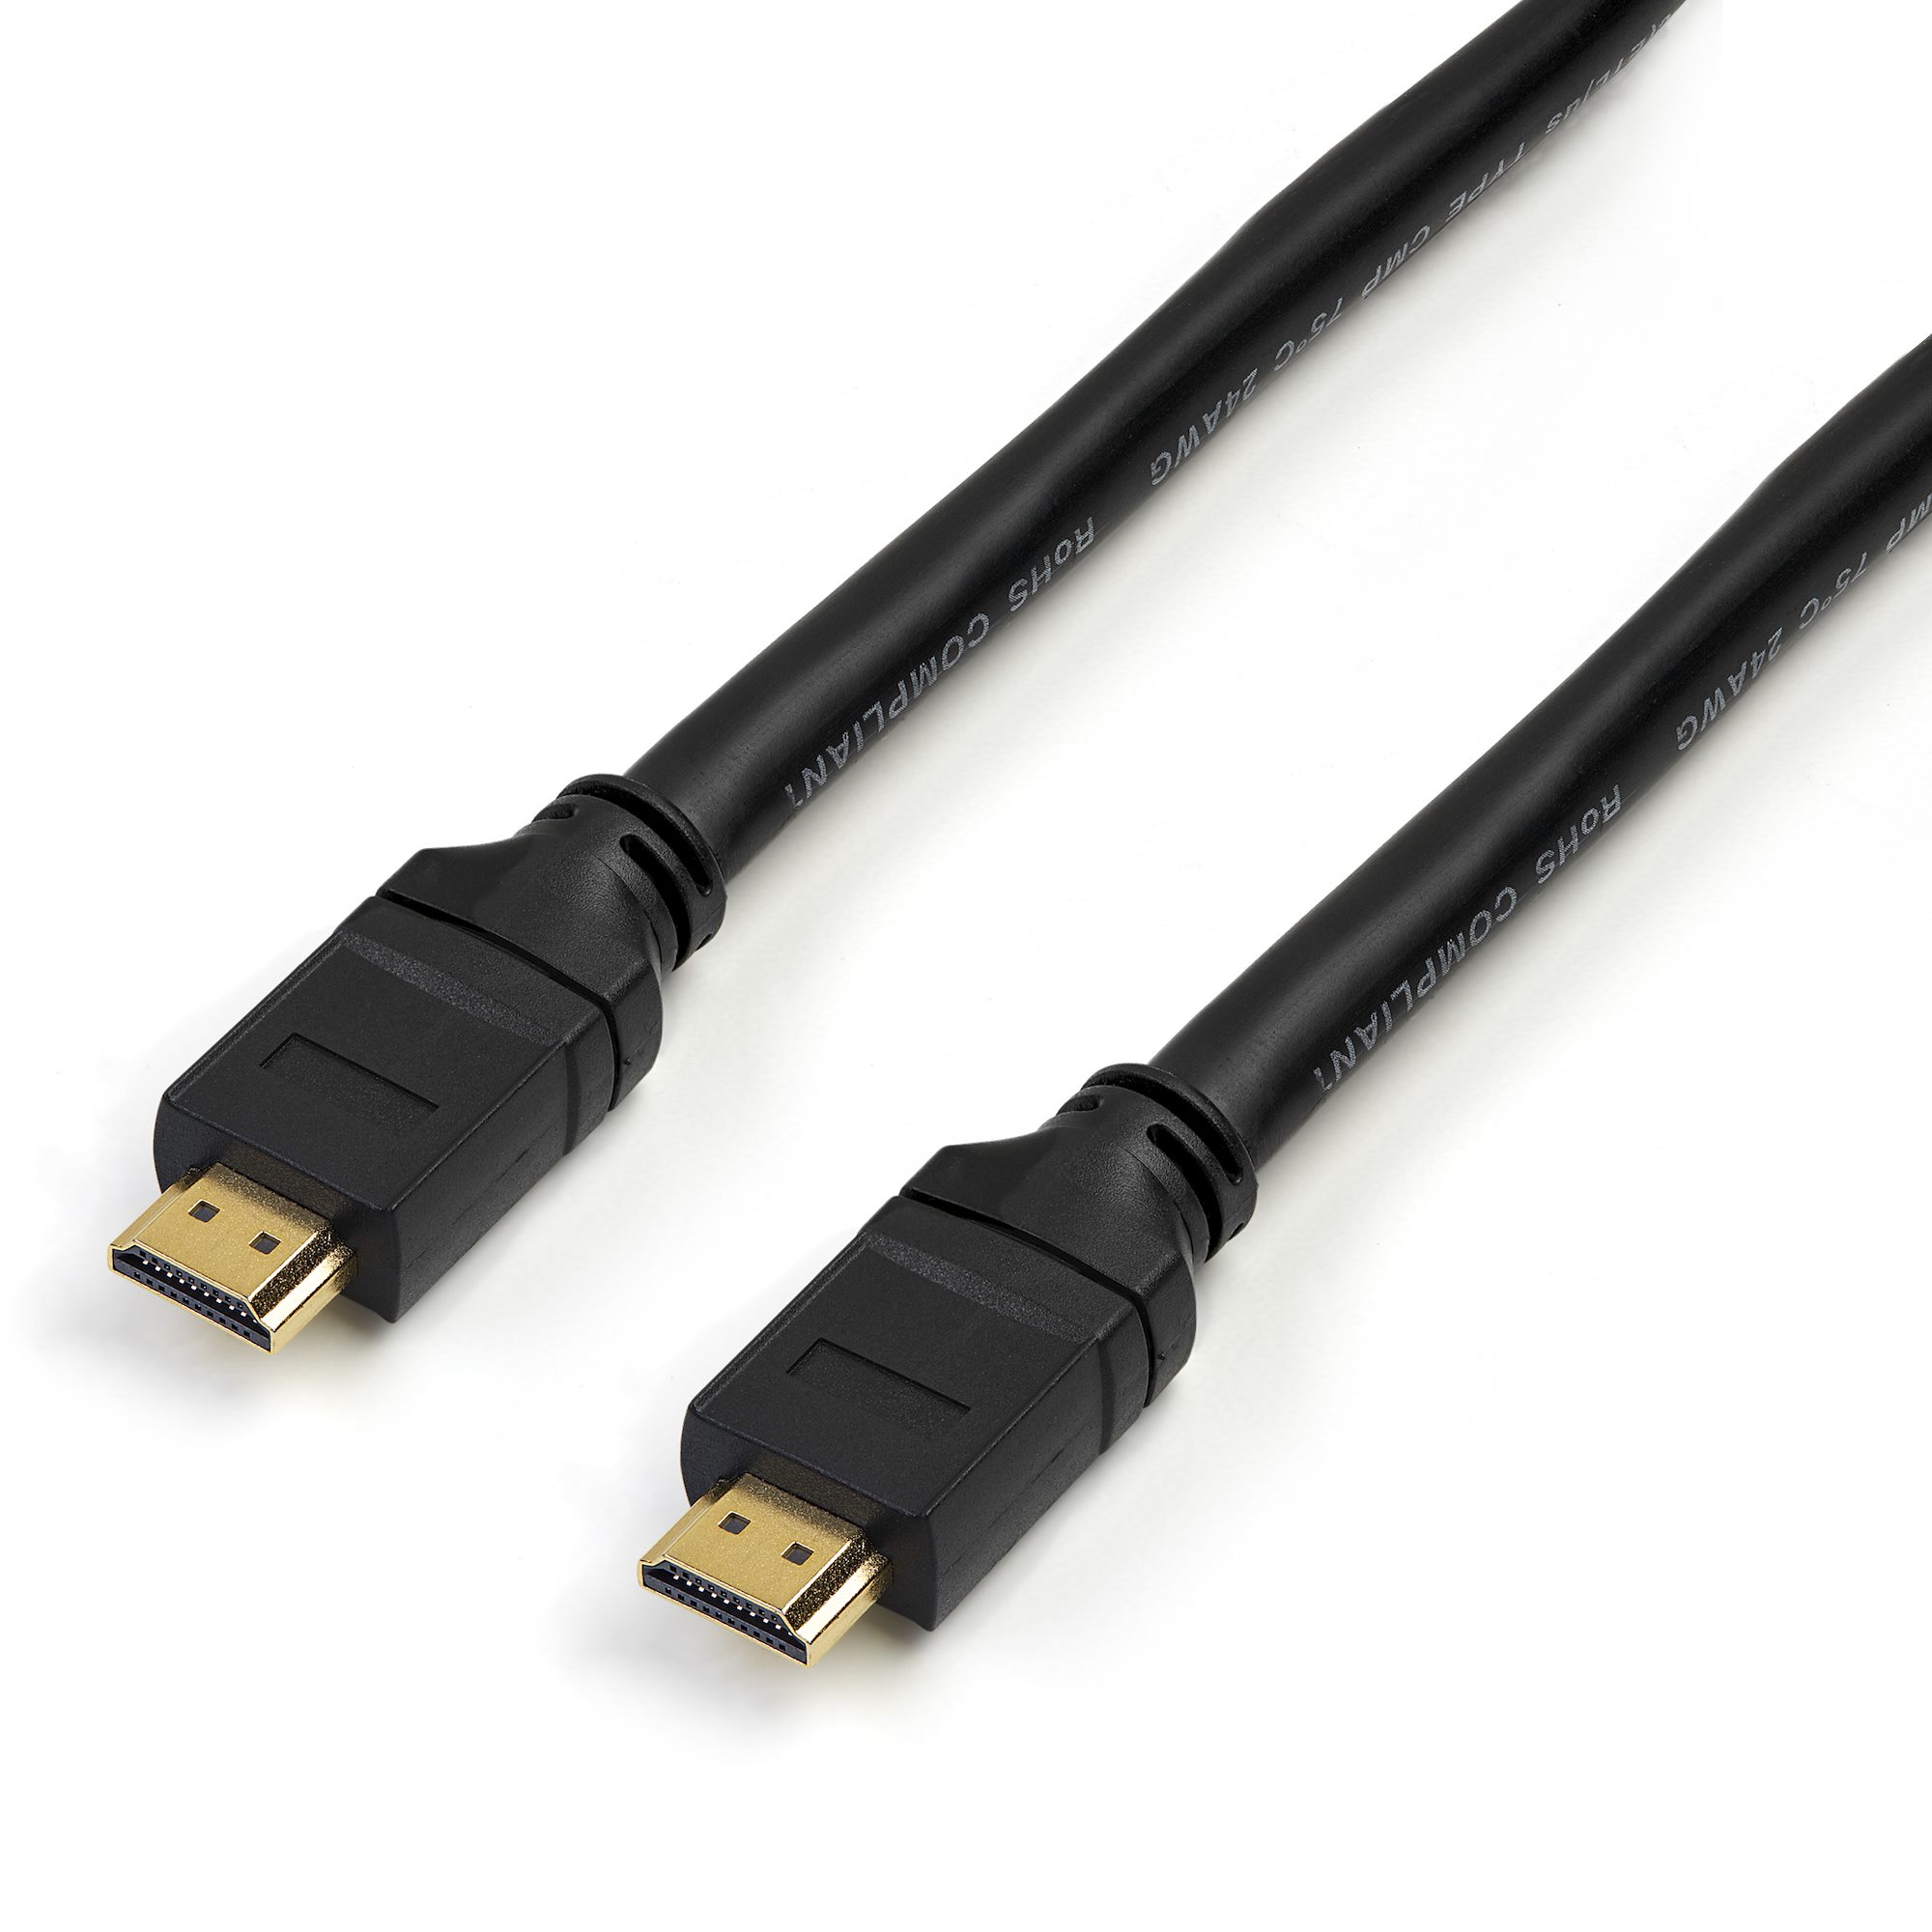 Cable video audio ethernet HDMI 1.4 Male Male 25 cm Full HD 1080p High Quality 